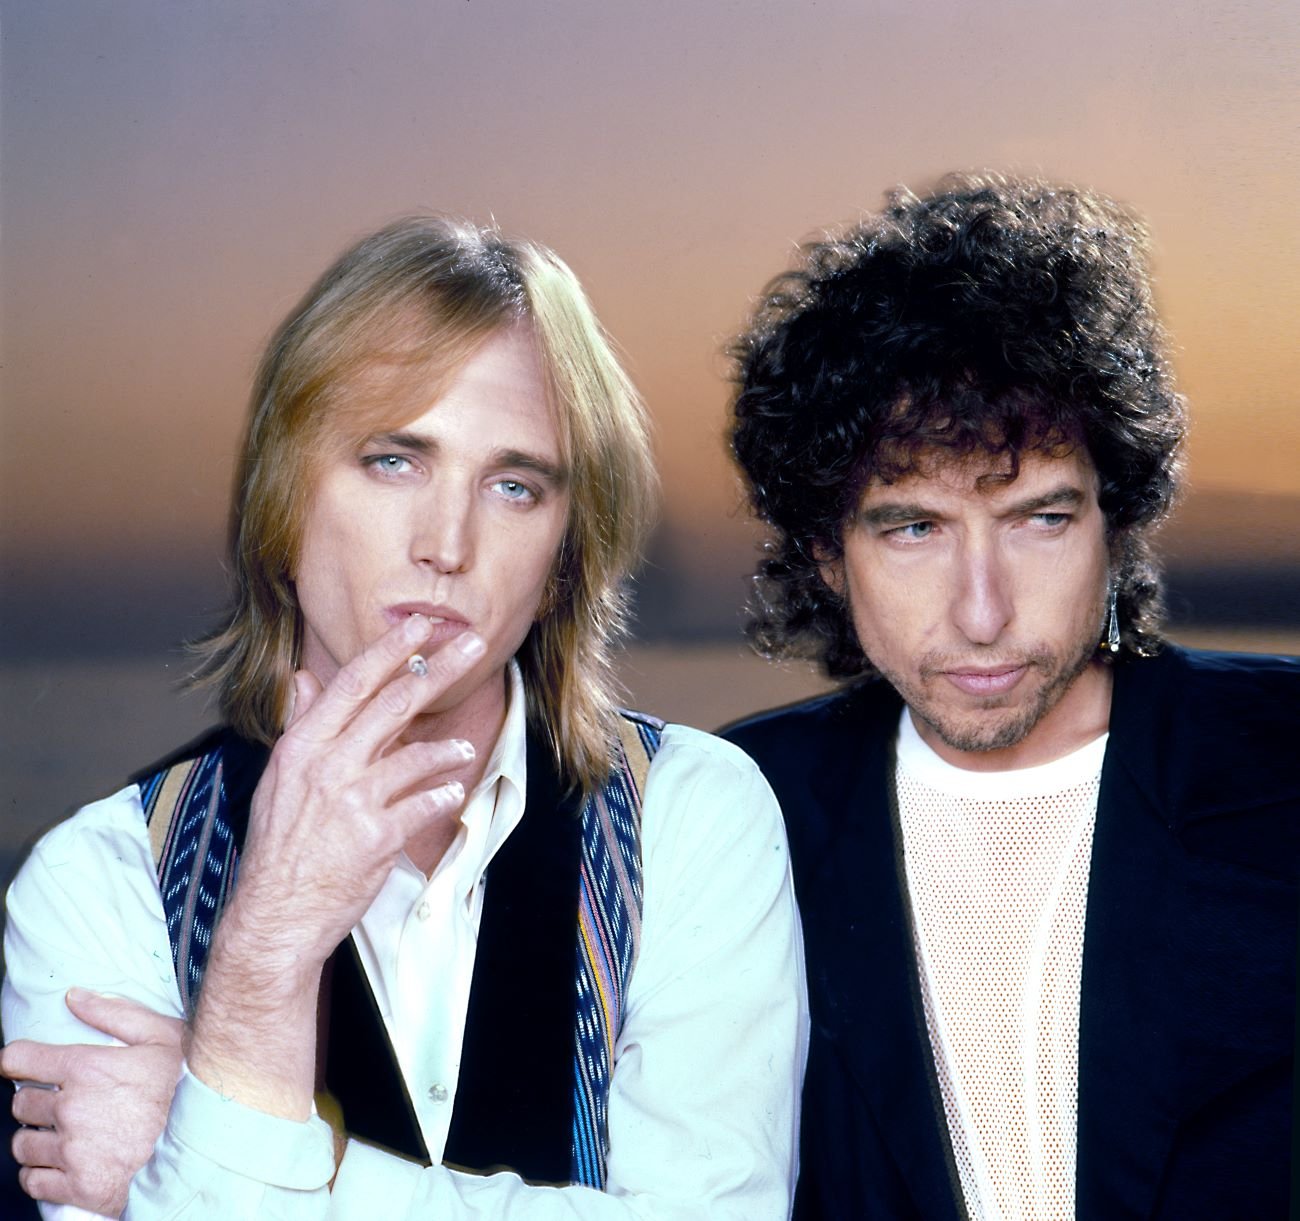 Tom Petty wears a vest and holds a cigarette and Bob Dylan wears a black jacket.